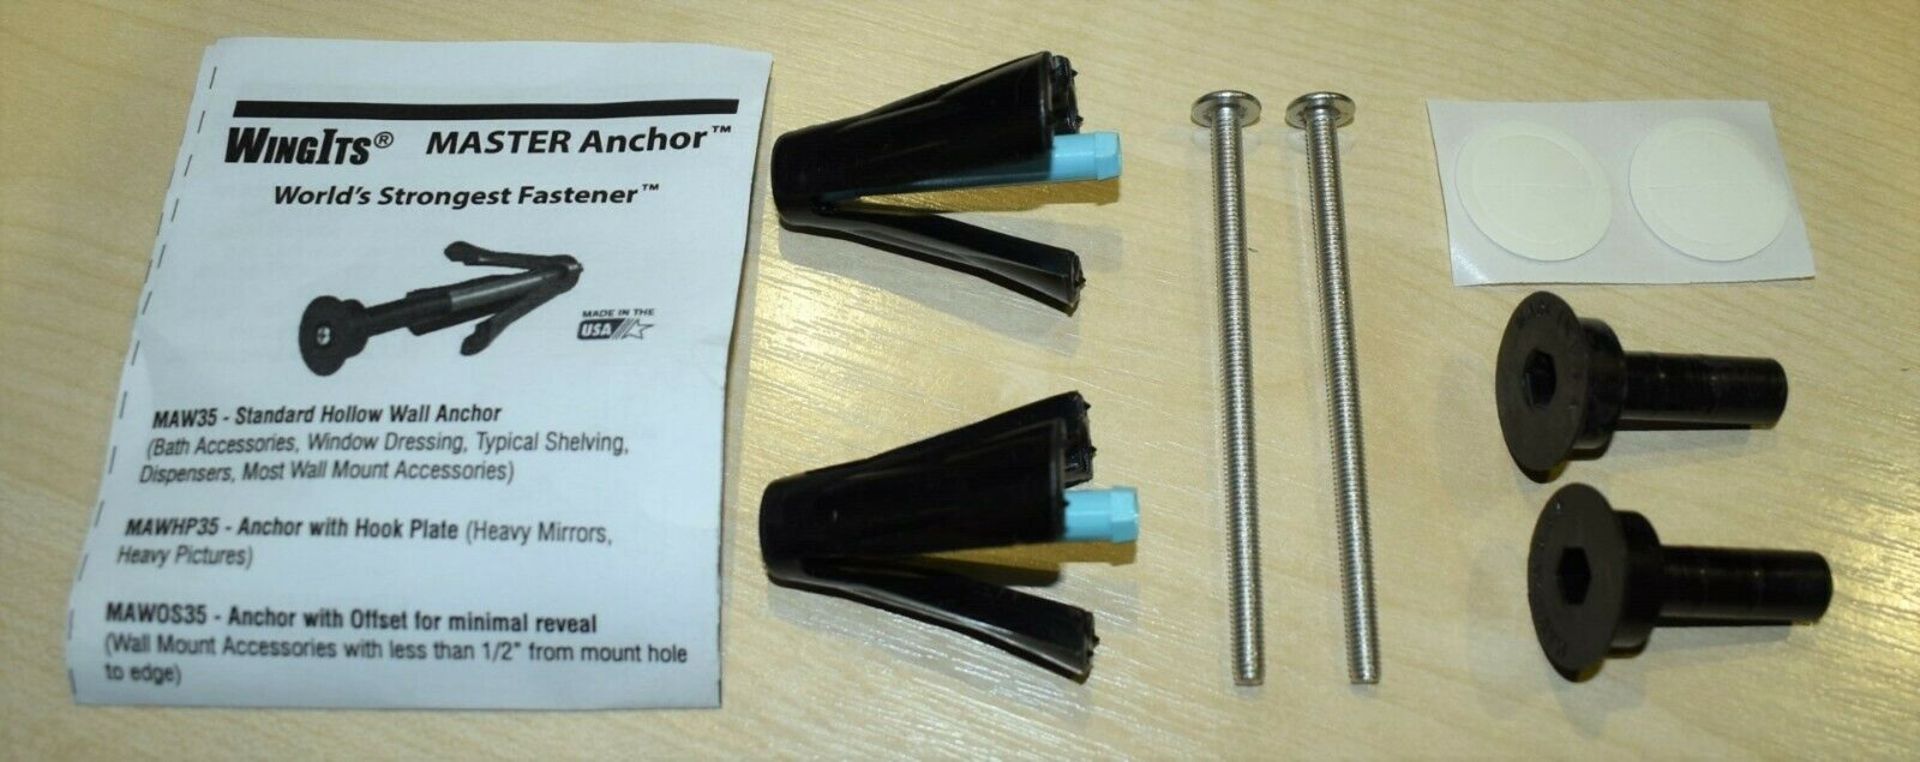 400 x Packs of WingIts Master Anchor Super Duty With Offset Drywall Fasteners - Brand New Stock - - Image 5 of 6